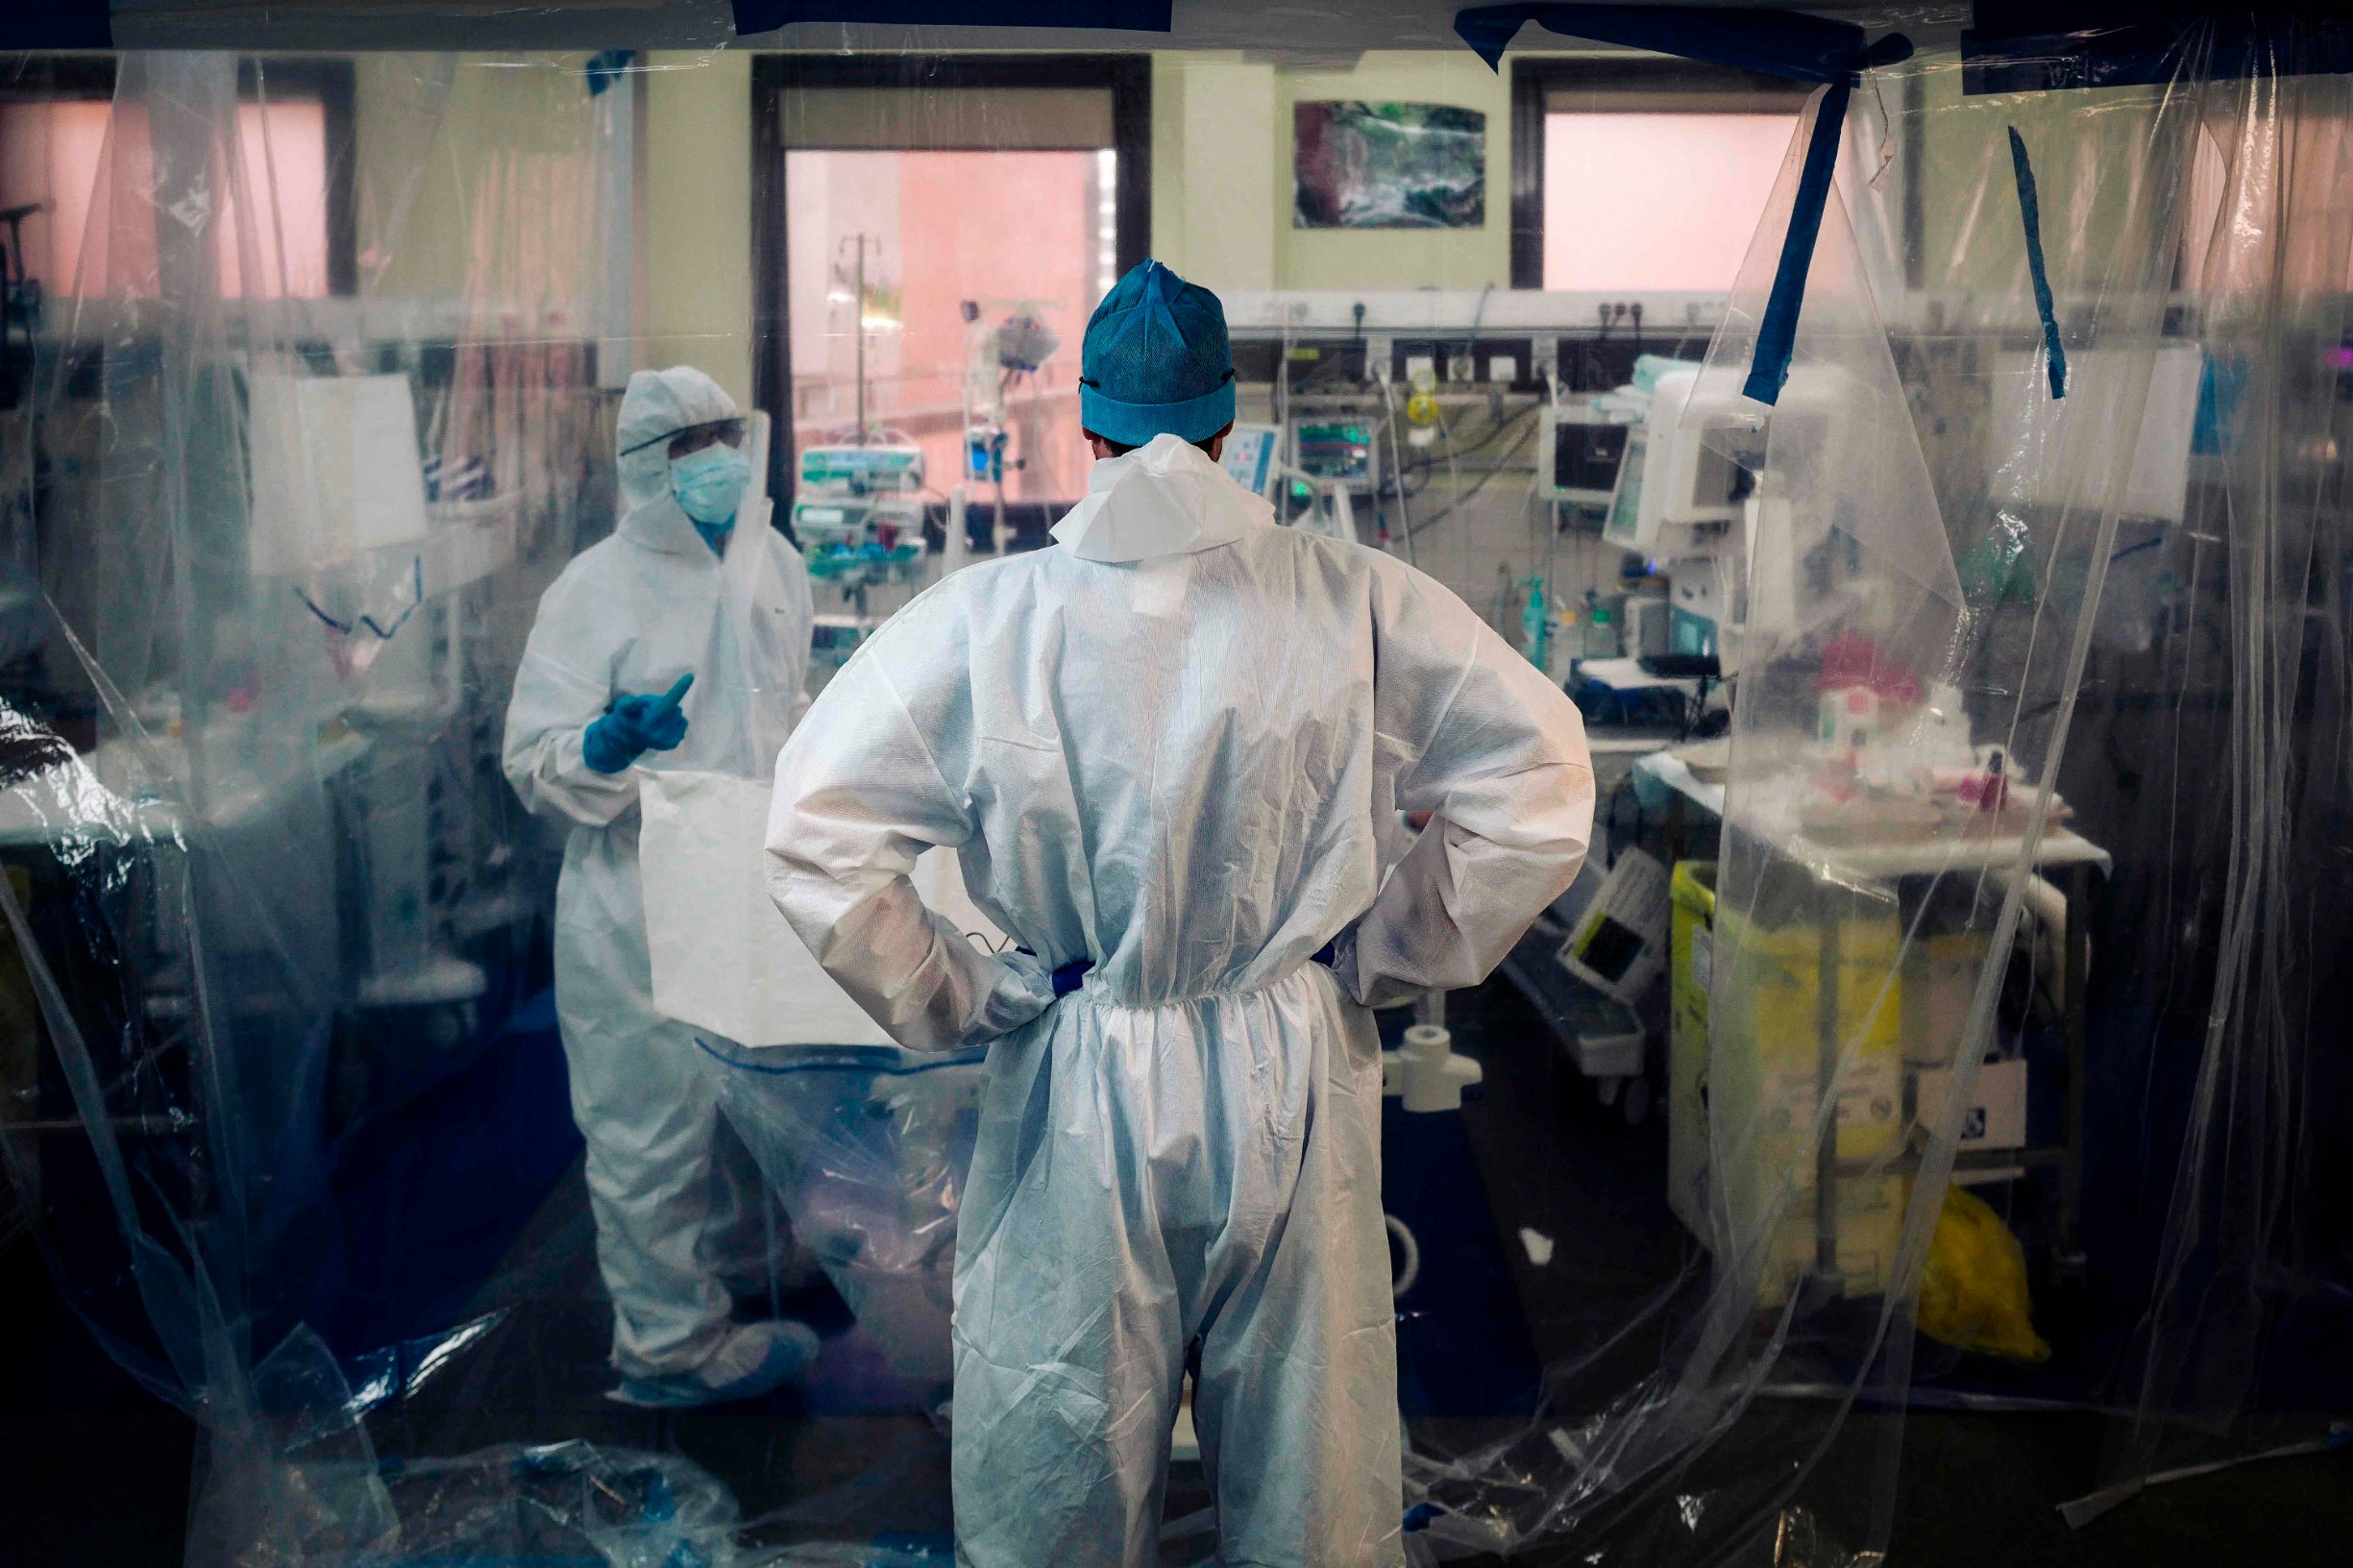 Medical staff members take care of a patient infected with COVID-19 at the intensive care unit of the Franco-Britannique hospital in Levallois-Perret, northern Paris, on April 9, 2020. (Photo by LUCAS BARIOULET / AFP)